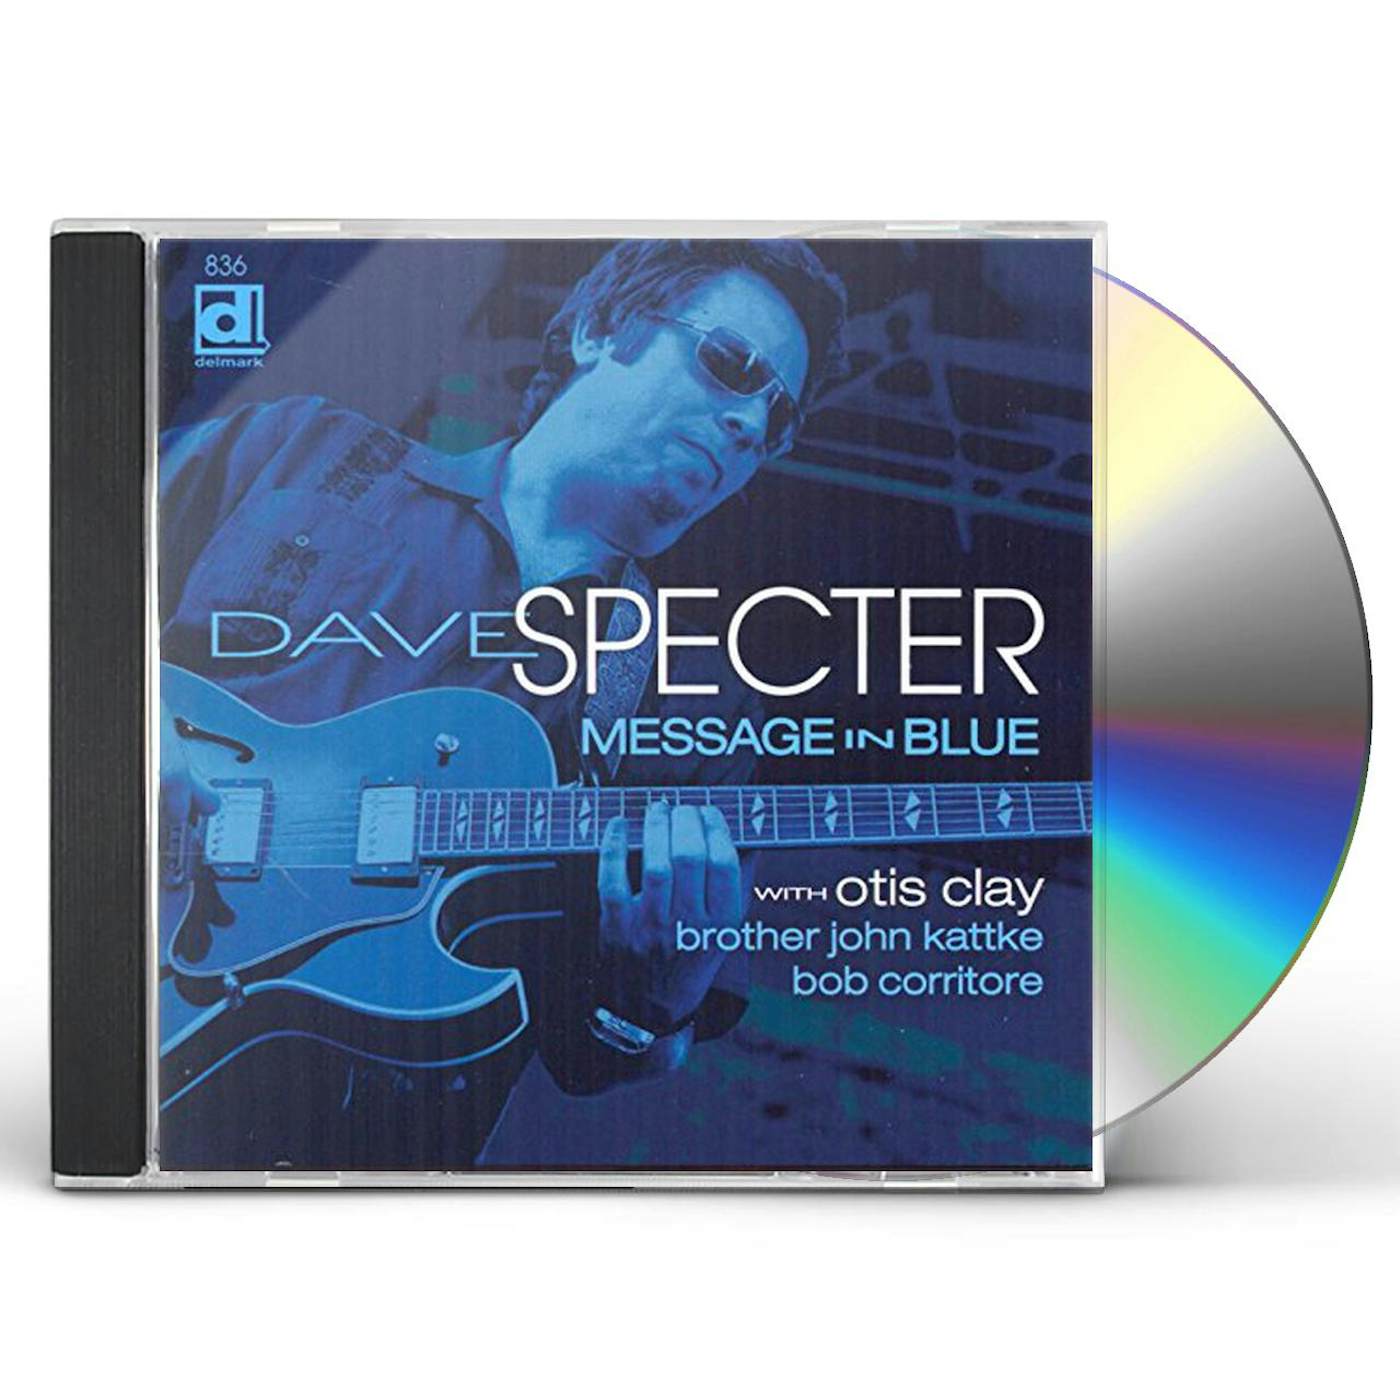 Dave Specter MESSAGE IN BLUE CD